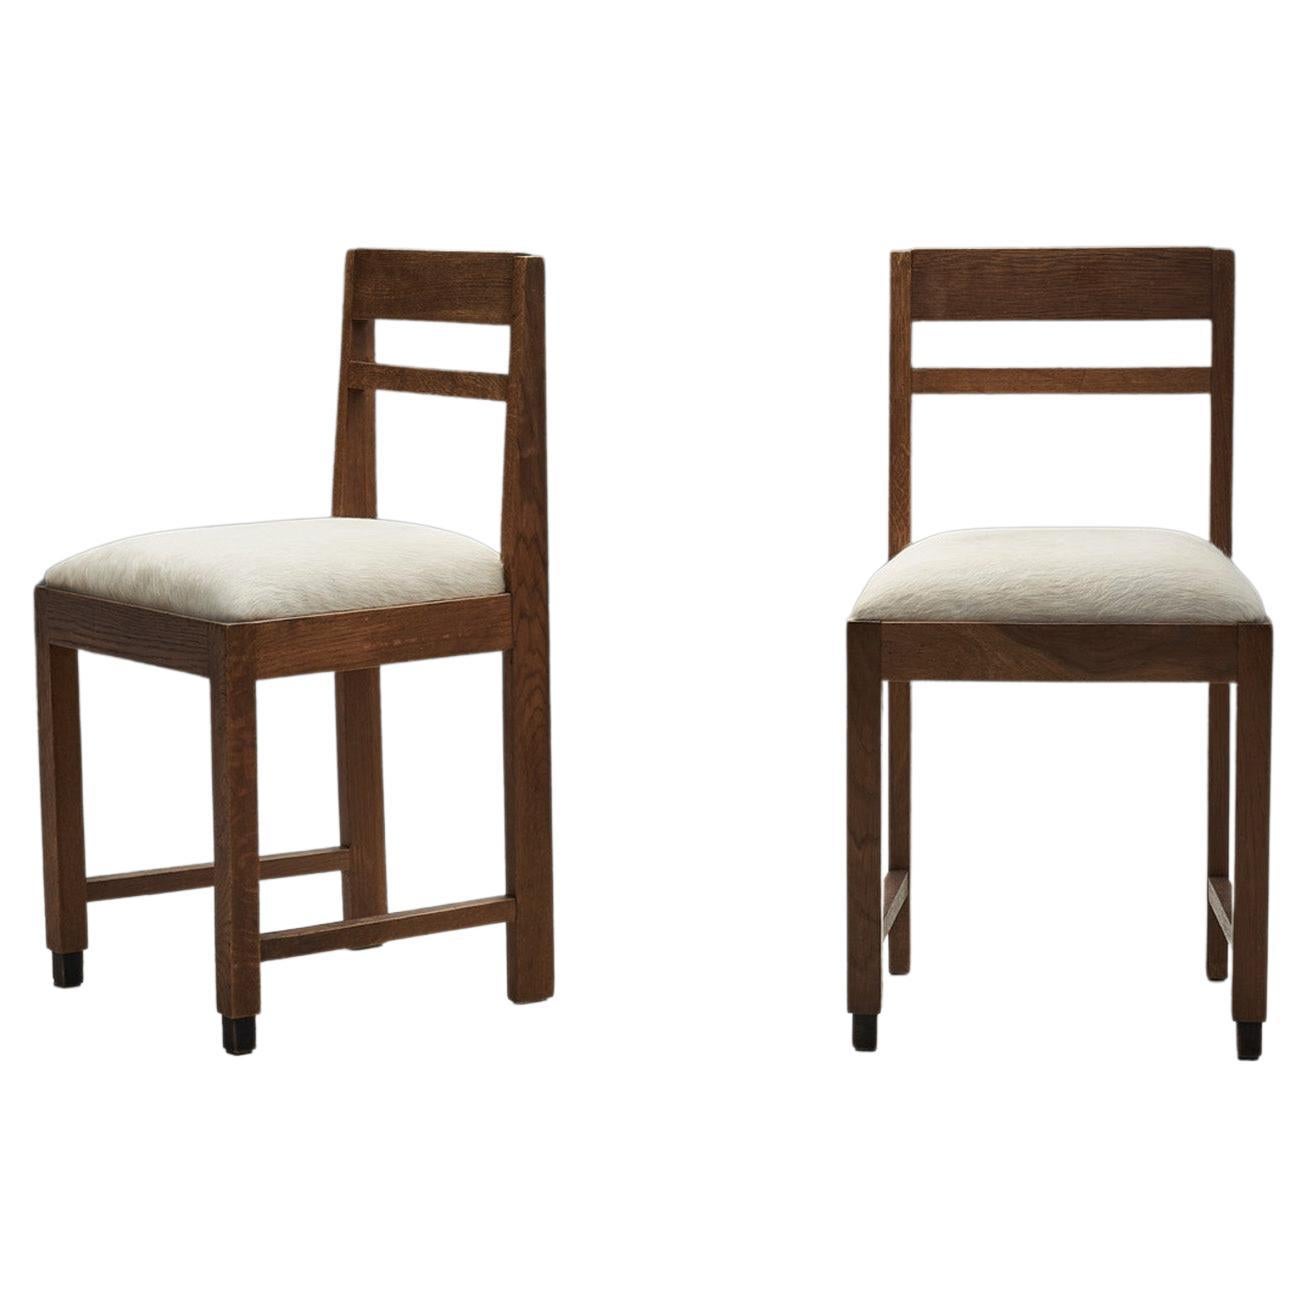 Amsterdamse School Side Chairs, The Netherlands, 1920s For Sale